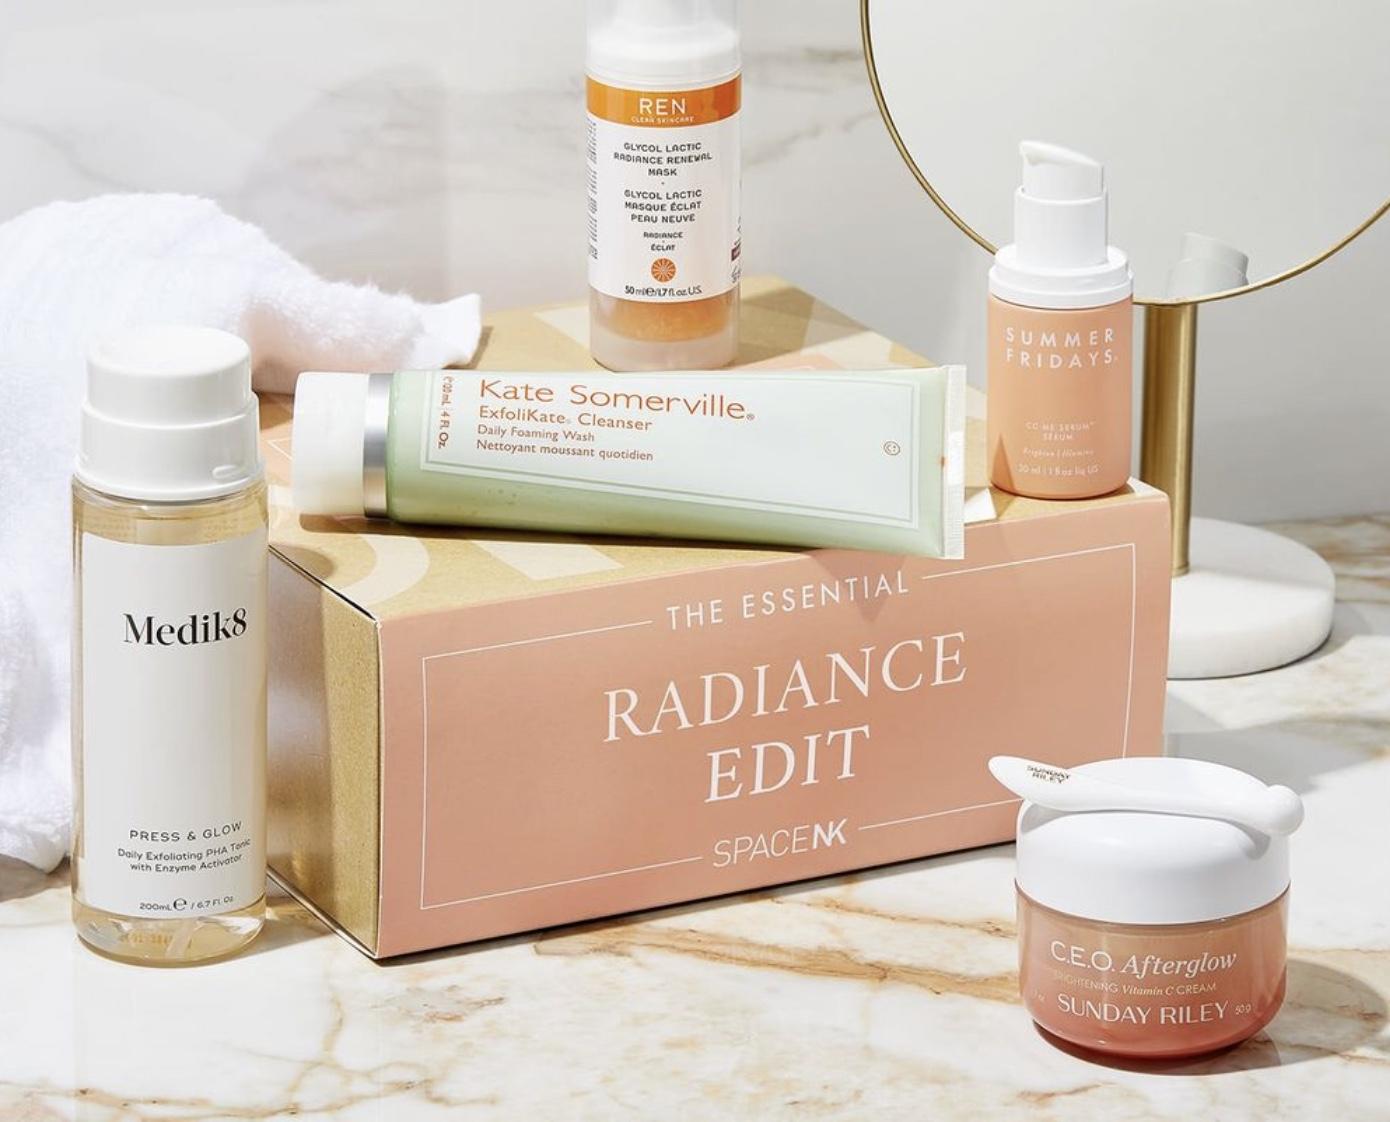 Space NK Radiance Edit – On Sale Now